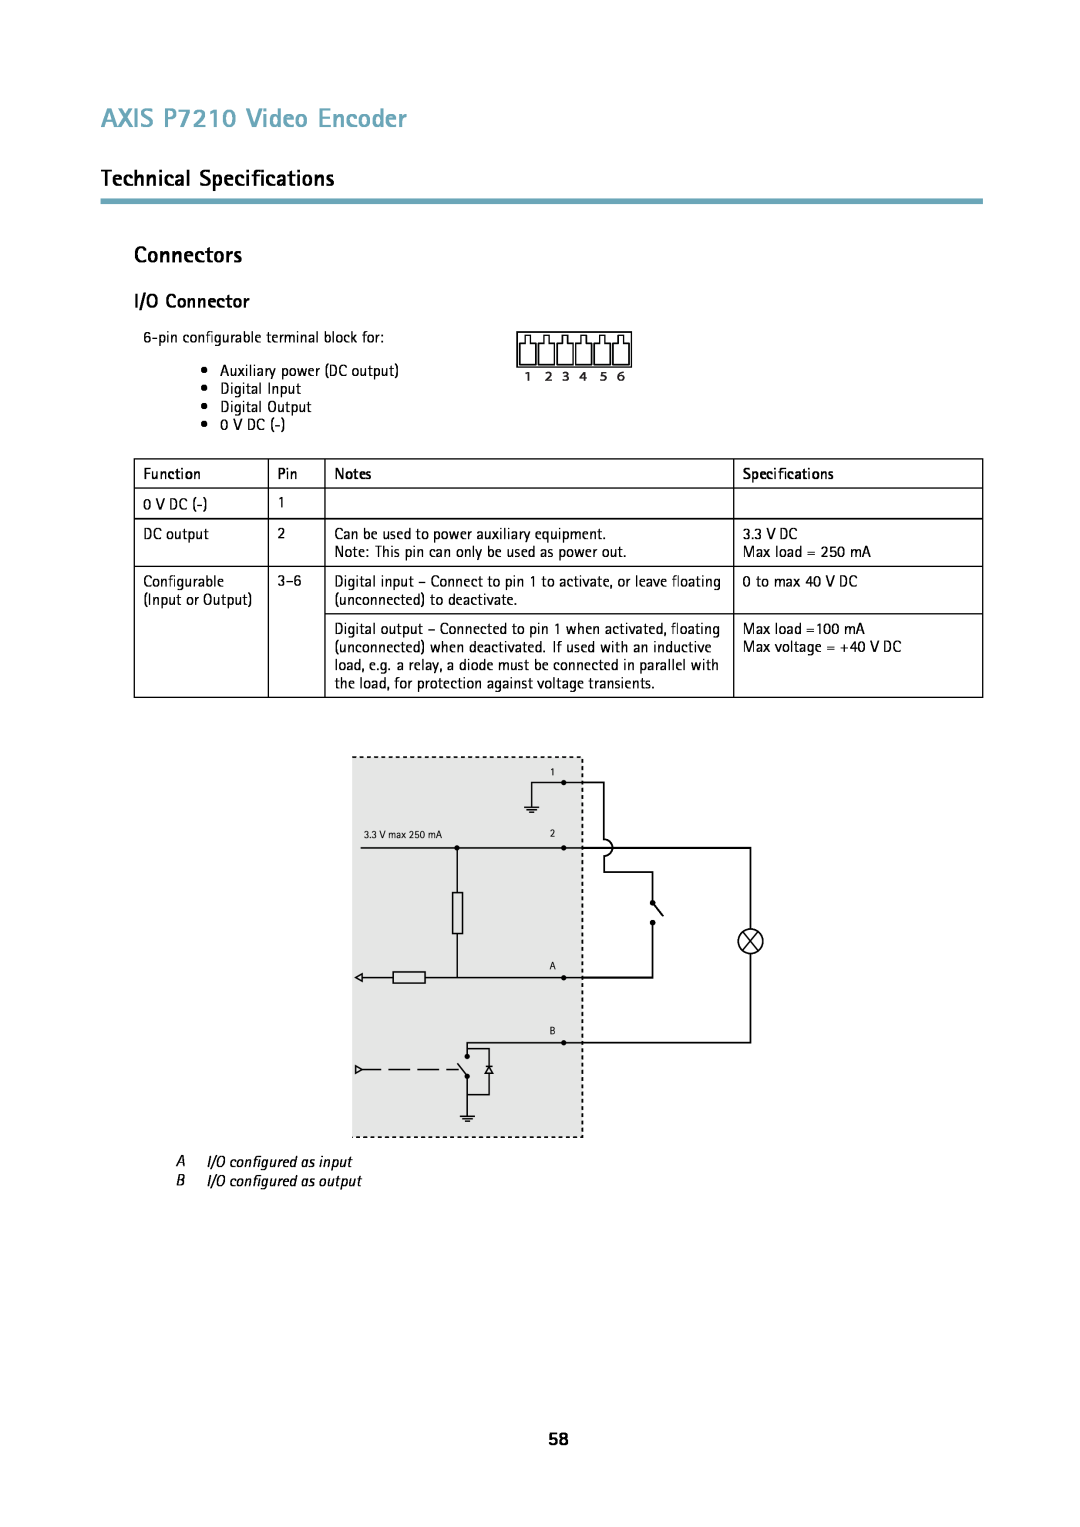 Axis Communications user manual Technical Specifications Connectors, AXIS P7210 Video Encoder, I/O Connector, Function 